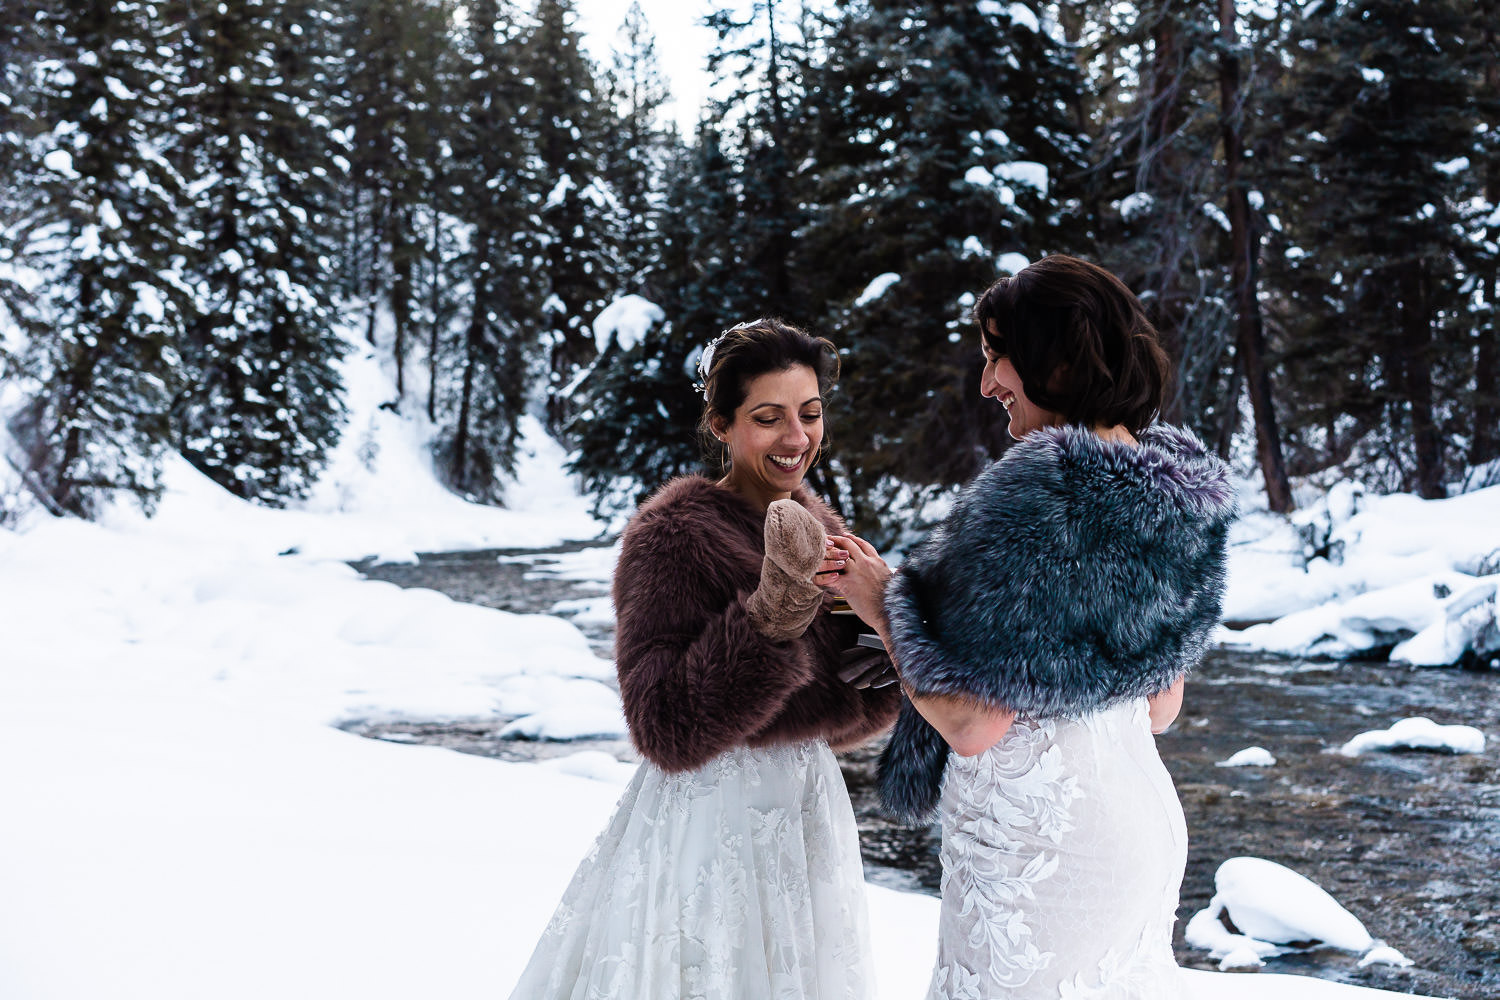 Lesbians getting married by a snowy riverbank during their LGBTQ+ elopement ceremony in Colorado